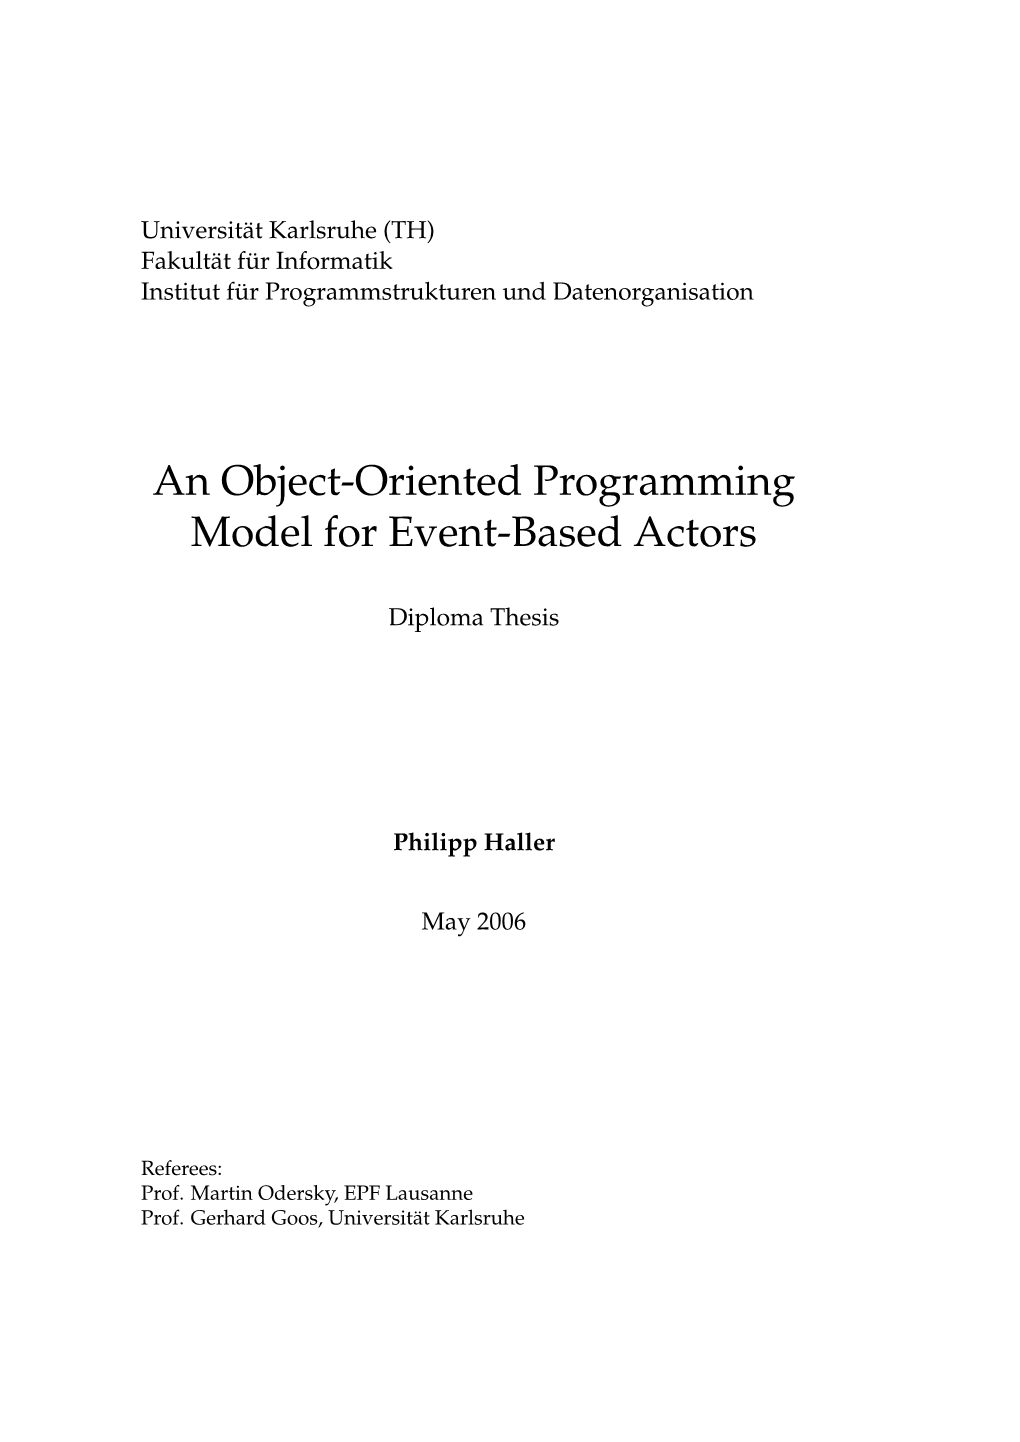 An Object-Oriented Programming Model for Event-Based Actors